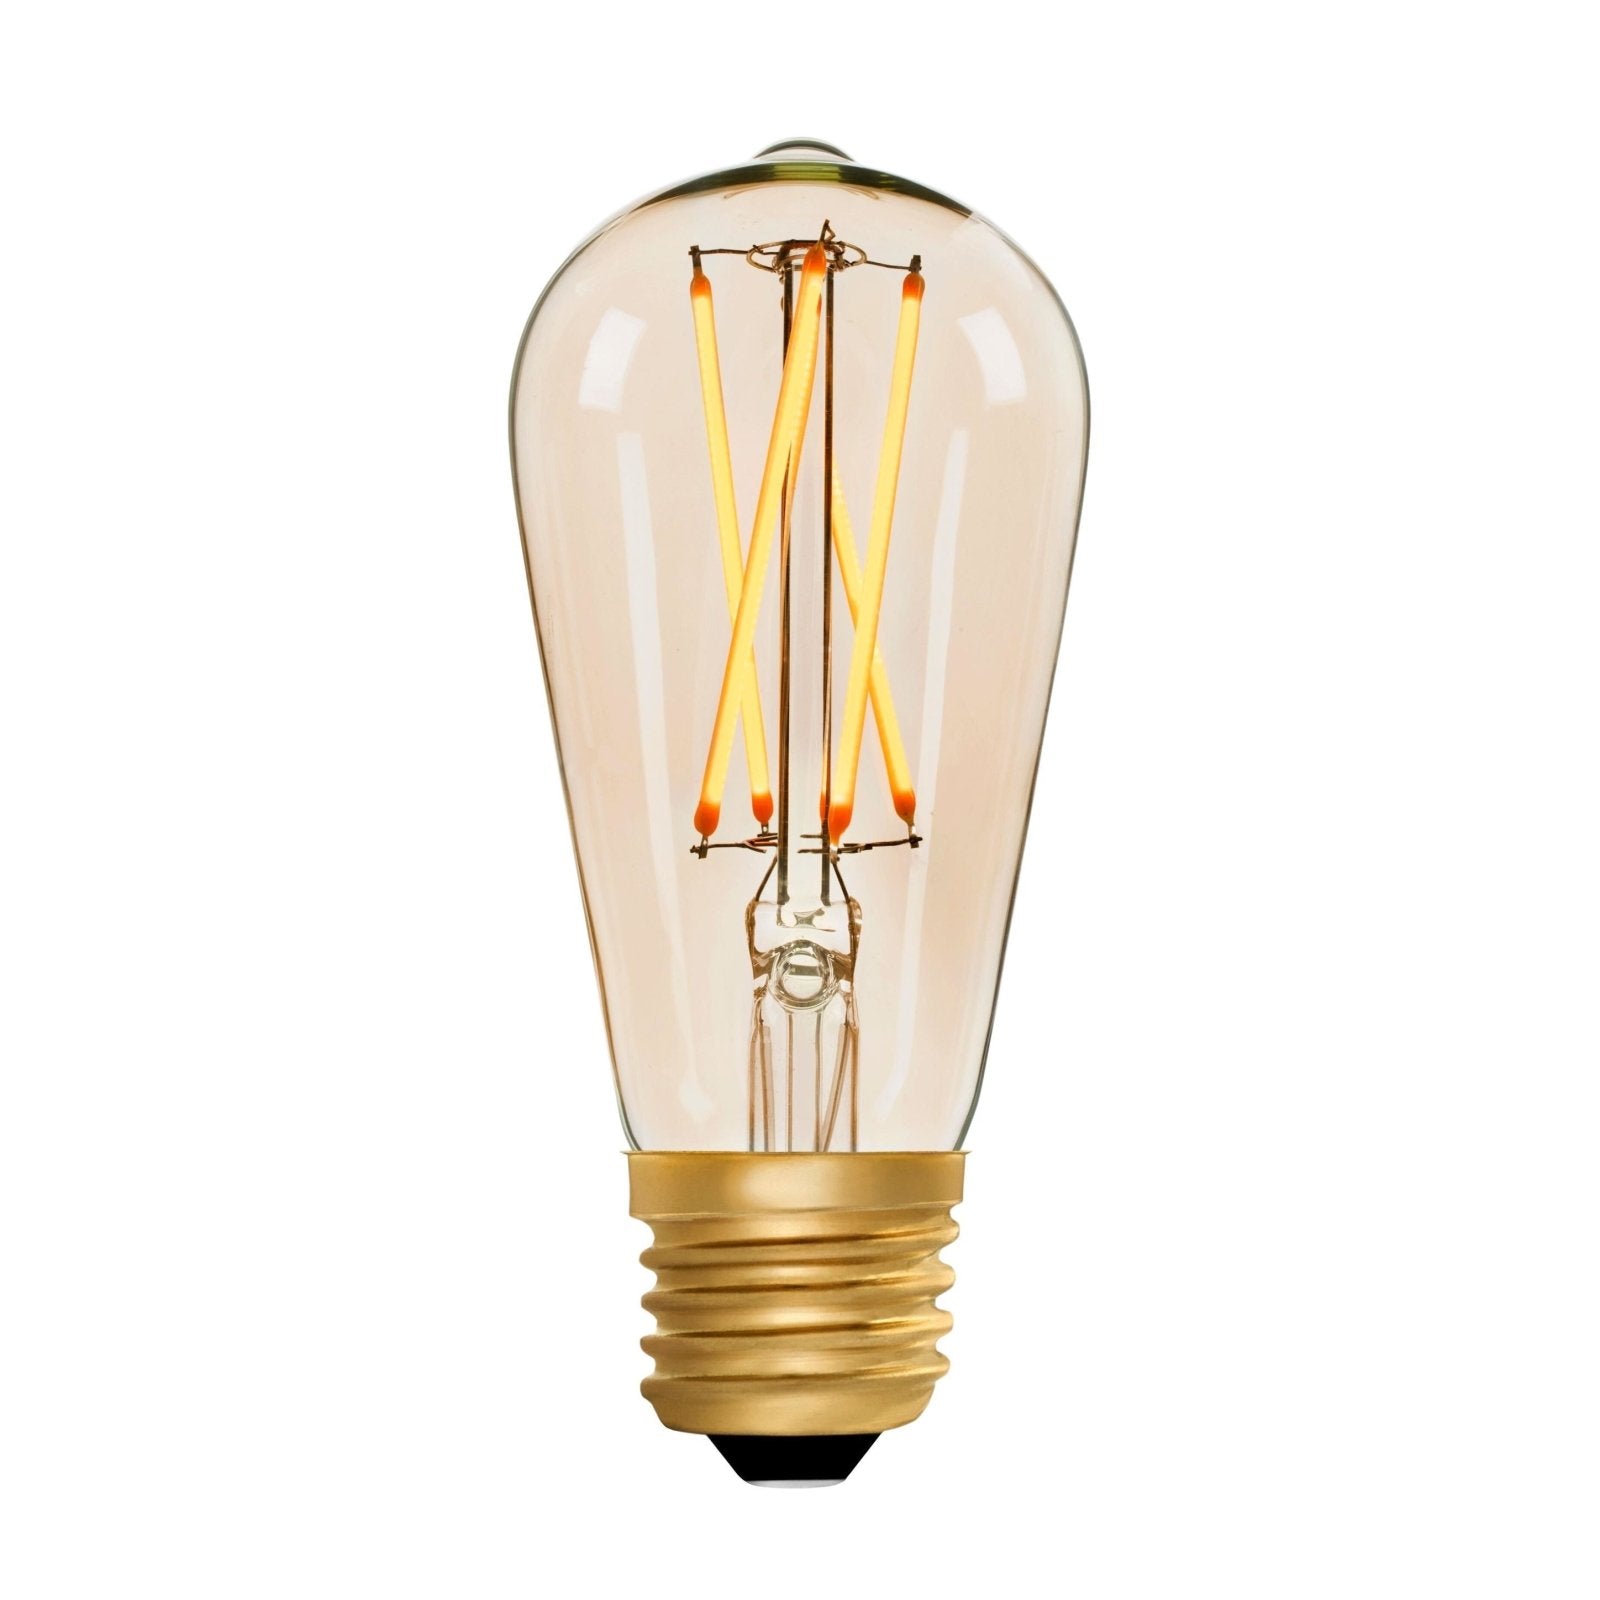 Squirrel Cage ST64 Amber 4W E27 2200K - LED Lamp from RETROLIGHT. Made by Zico Lighting.